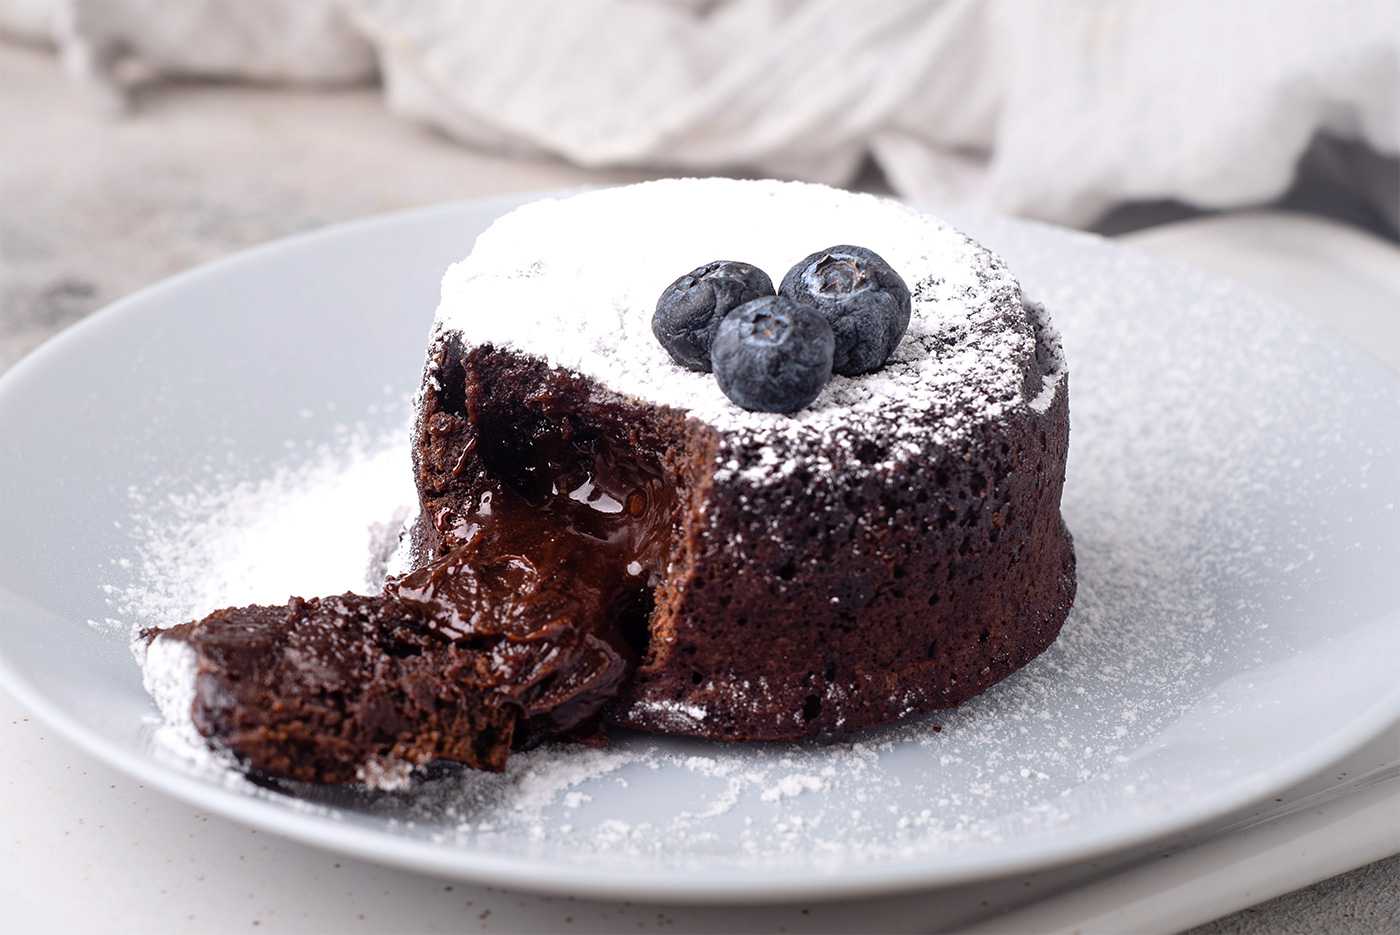 Small chocolate cake with chocolate spilled from the middle topped with blueberries and sugar powder